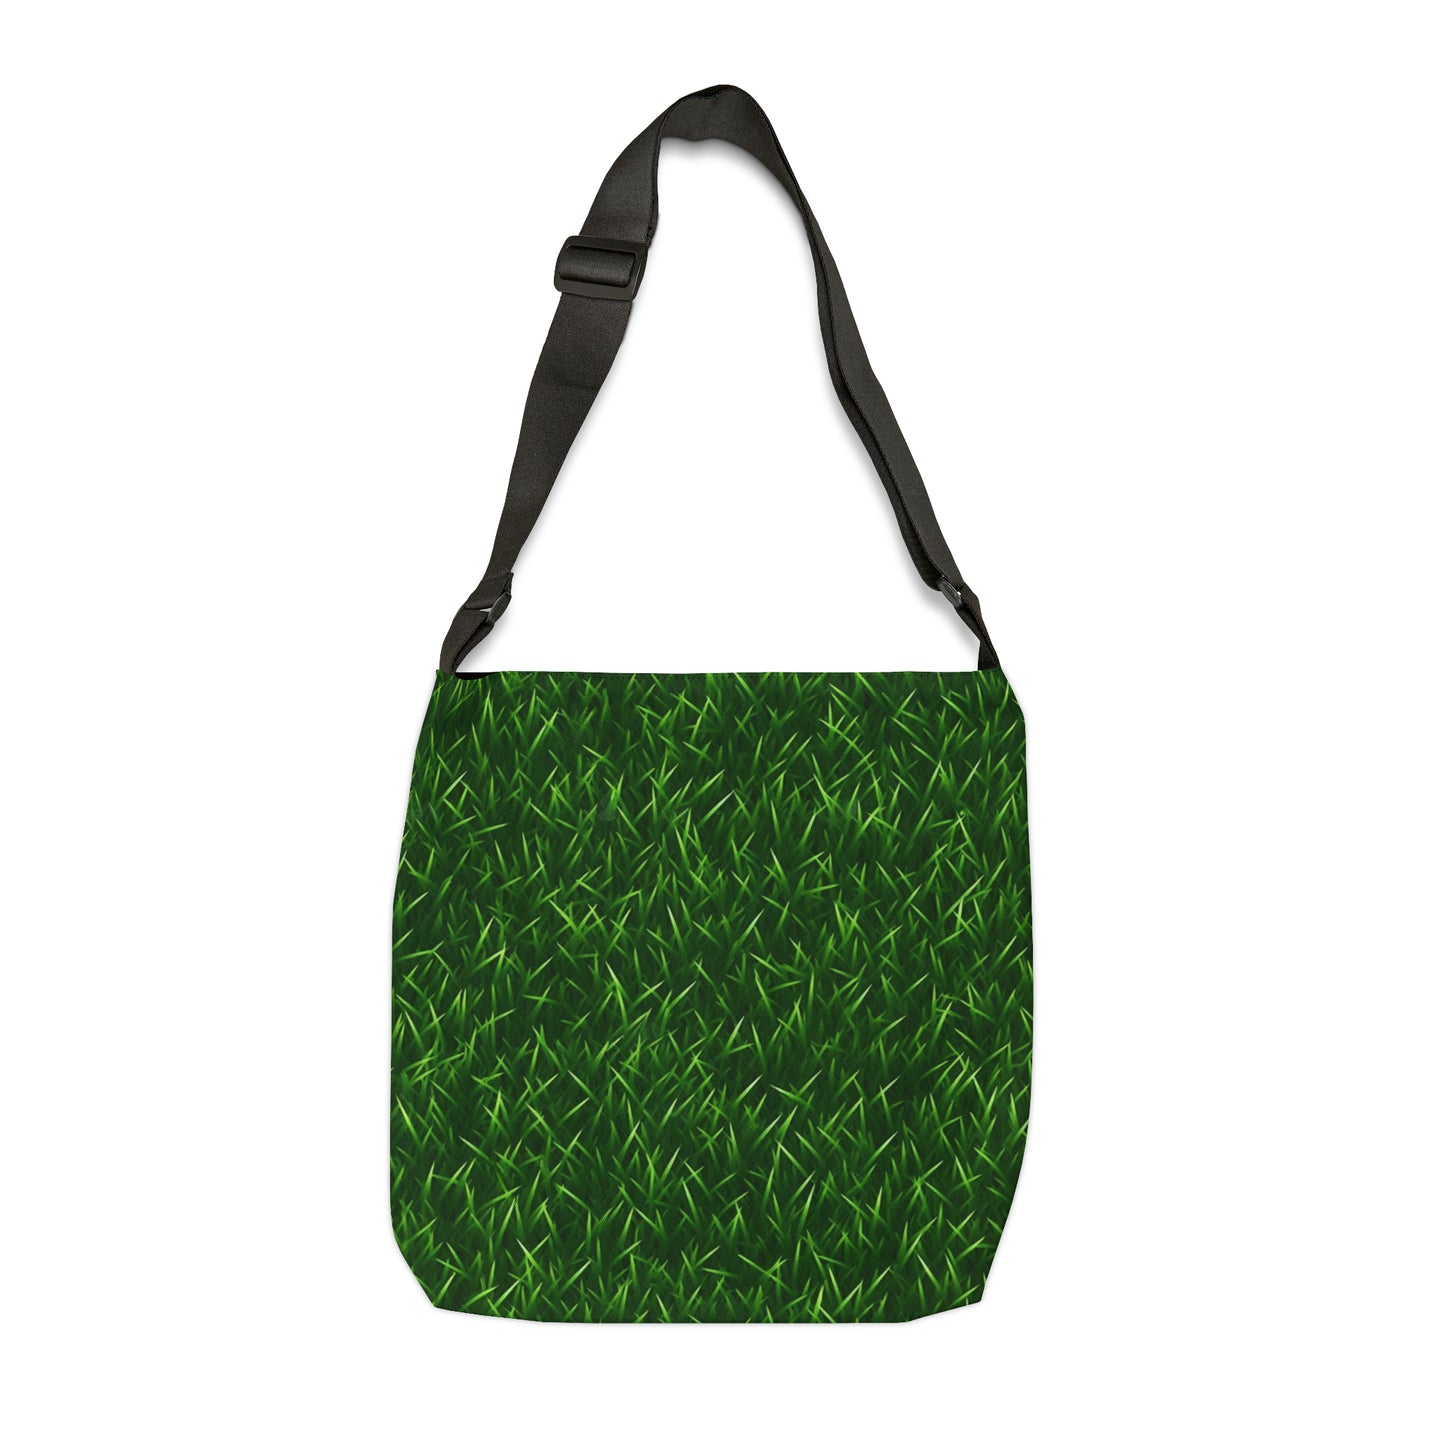 Touch Grass Indoor Style Outdoor Green Artificial Grass Turf - Adjustable Tote Bag (AOP)